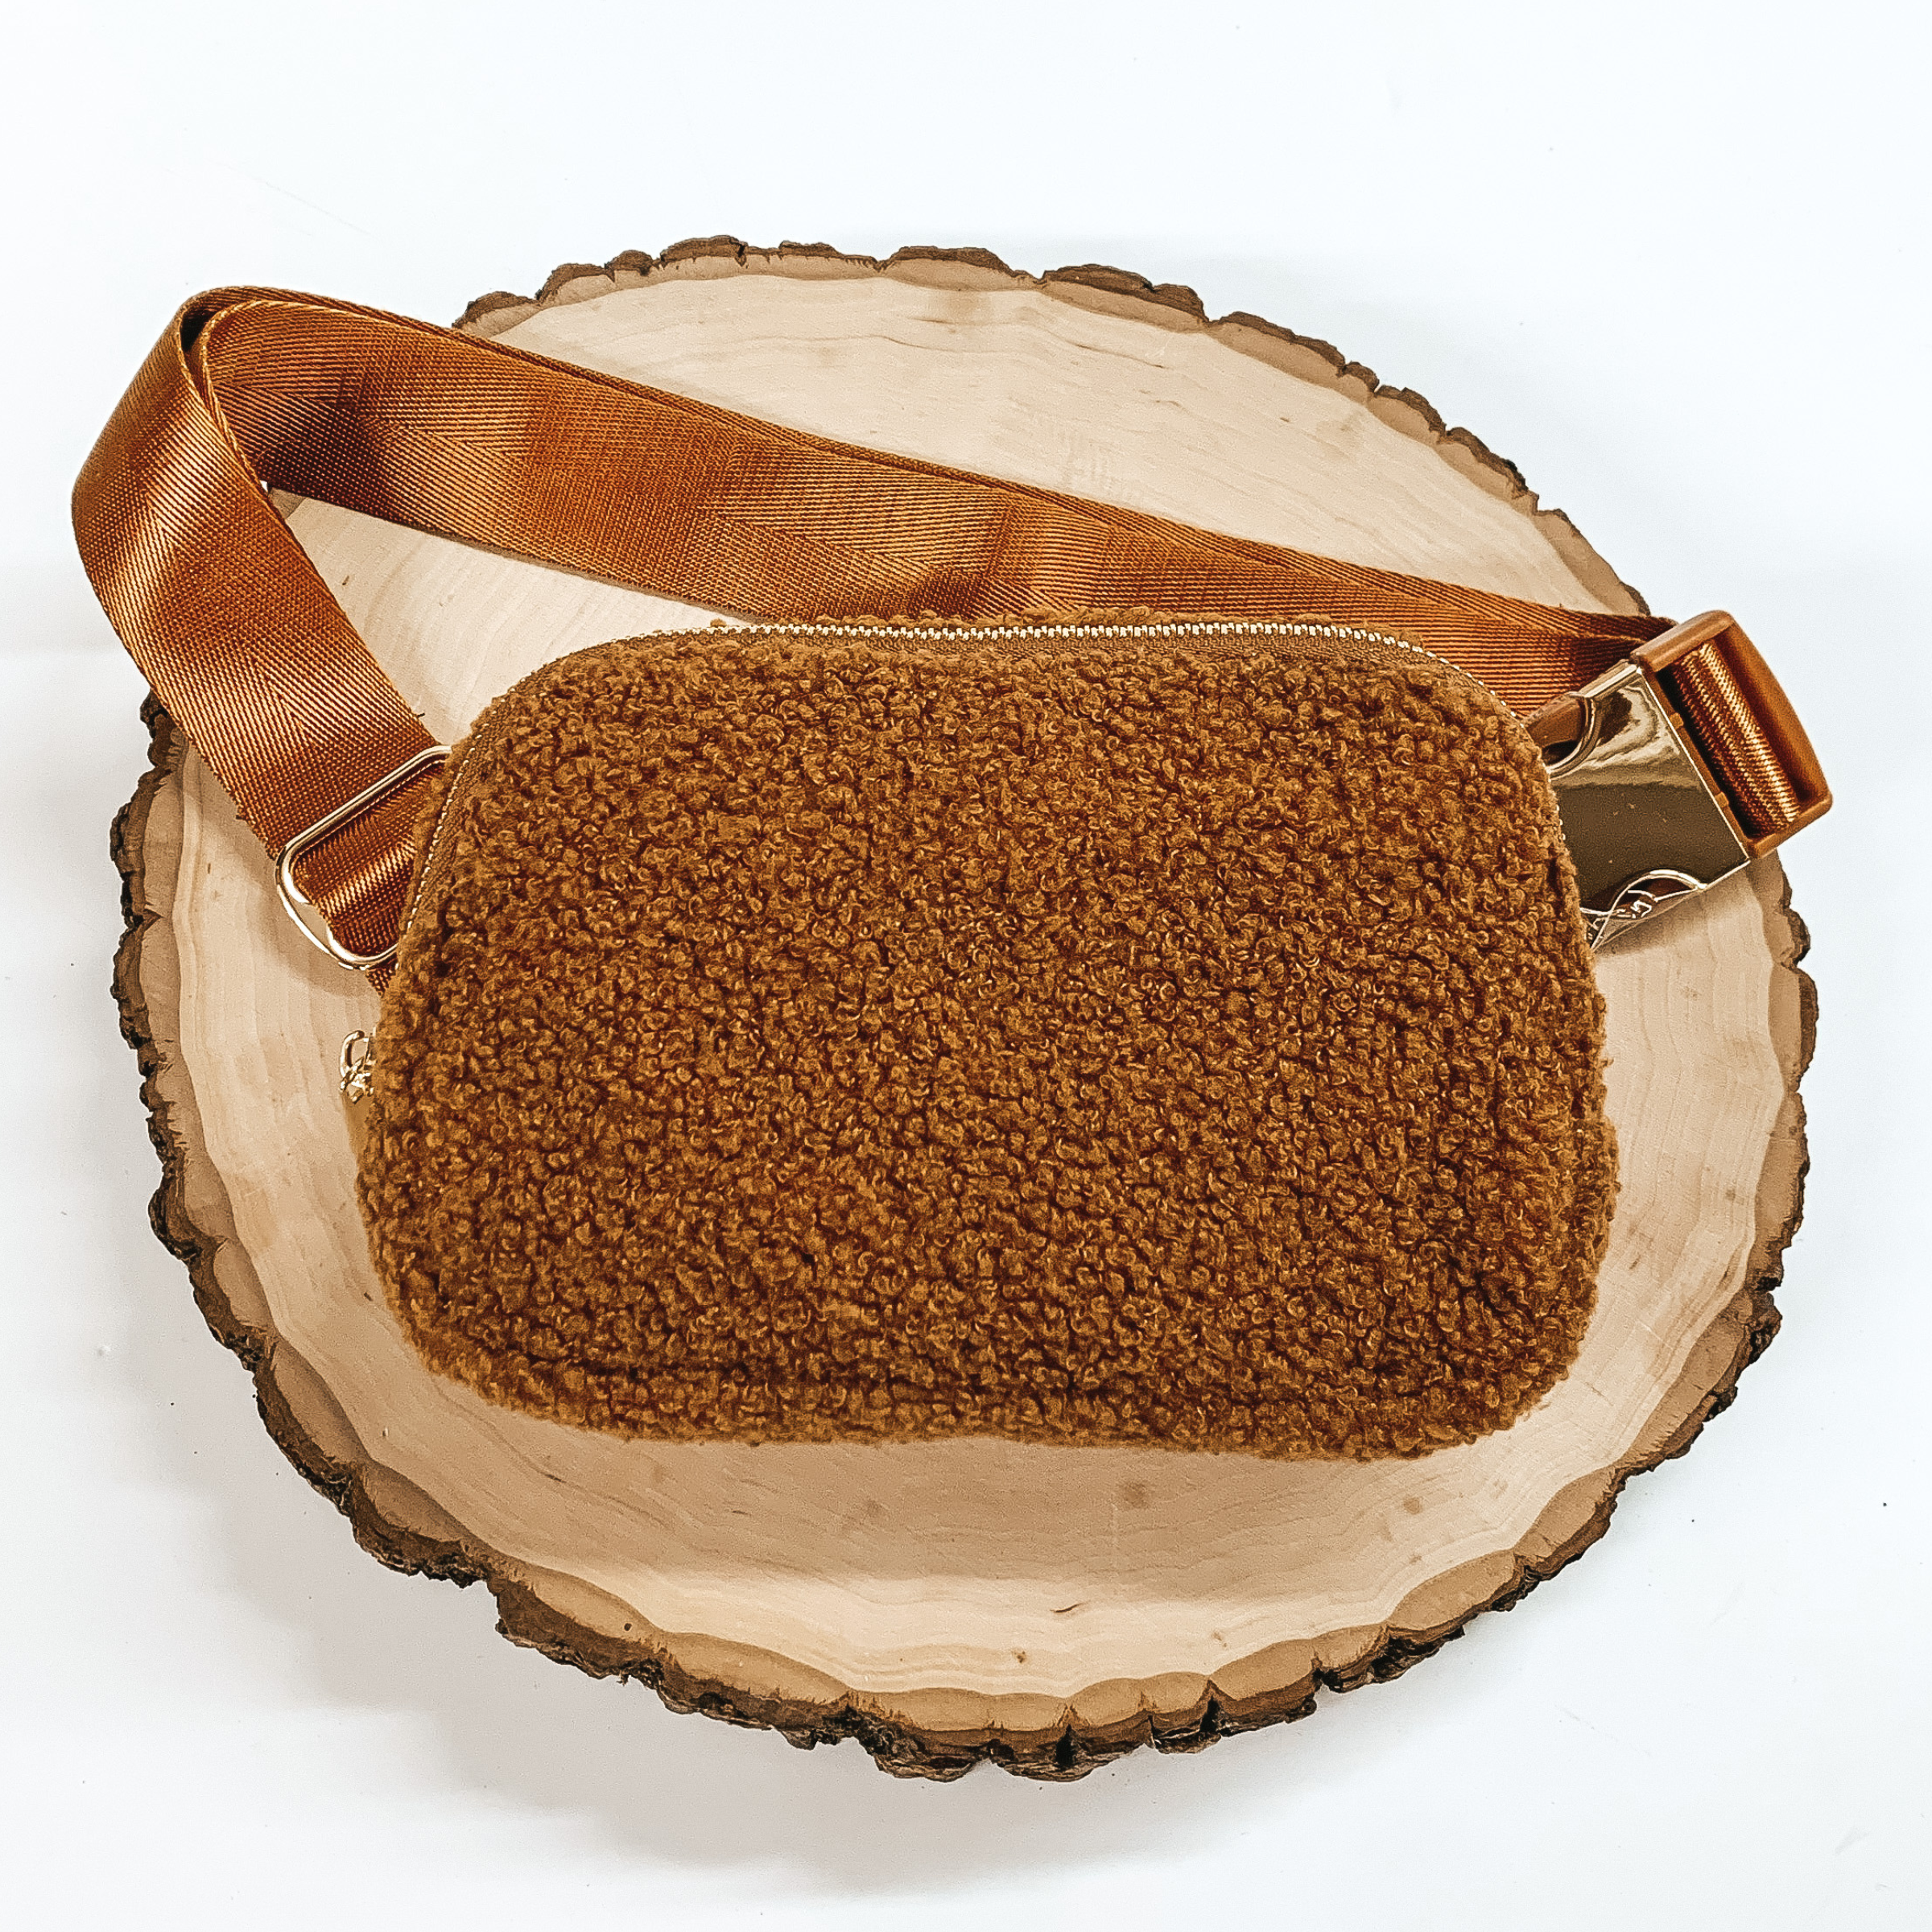 Brown, sherpa fanny pack with a top zipper across the front. This fanny pack also includes brown straps and gold clips. This fanny pack is pictured on a piece of wood on a white background. 